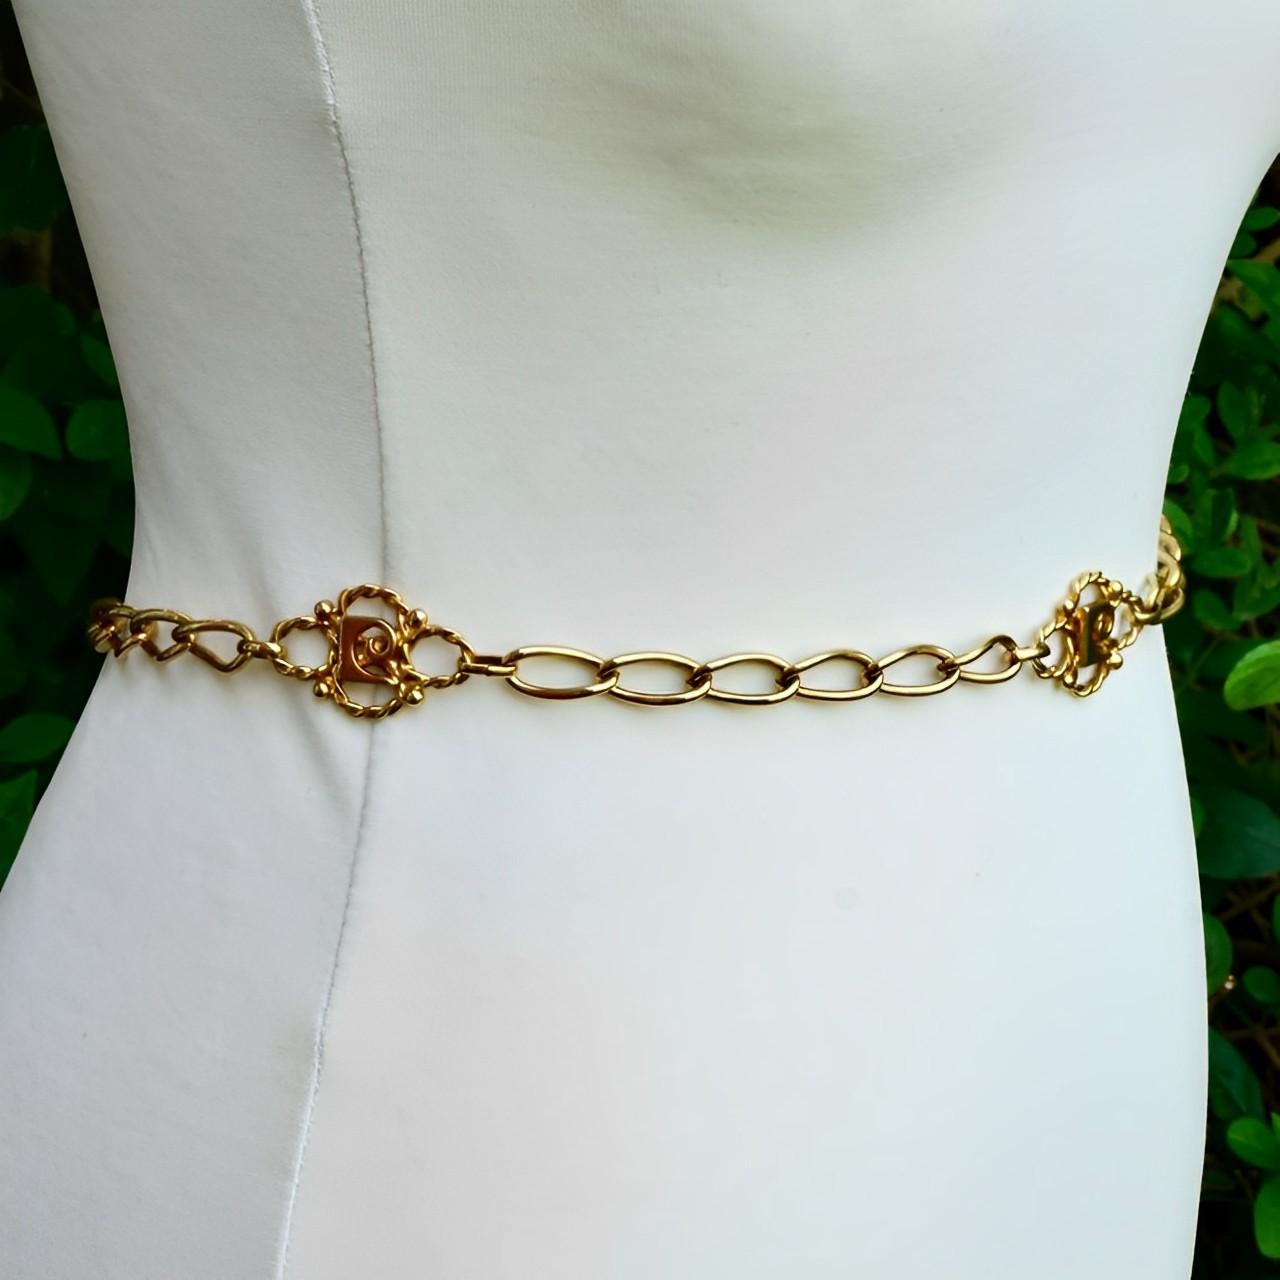 Pierre Cardin Monogram Gold Plated Chain Link Belt circa 1970s For Sale 3